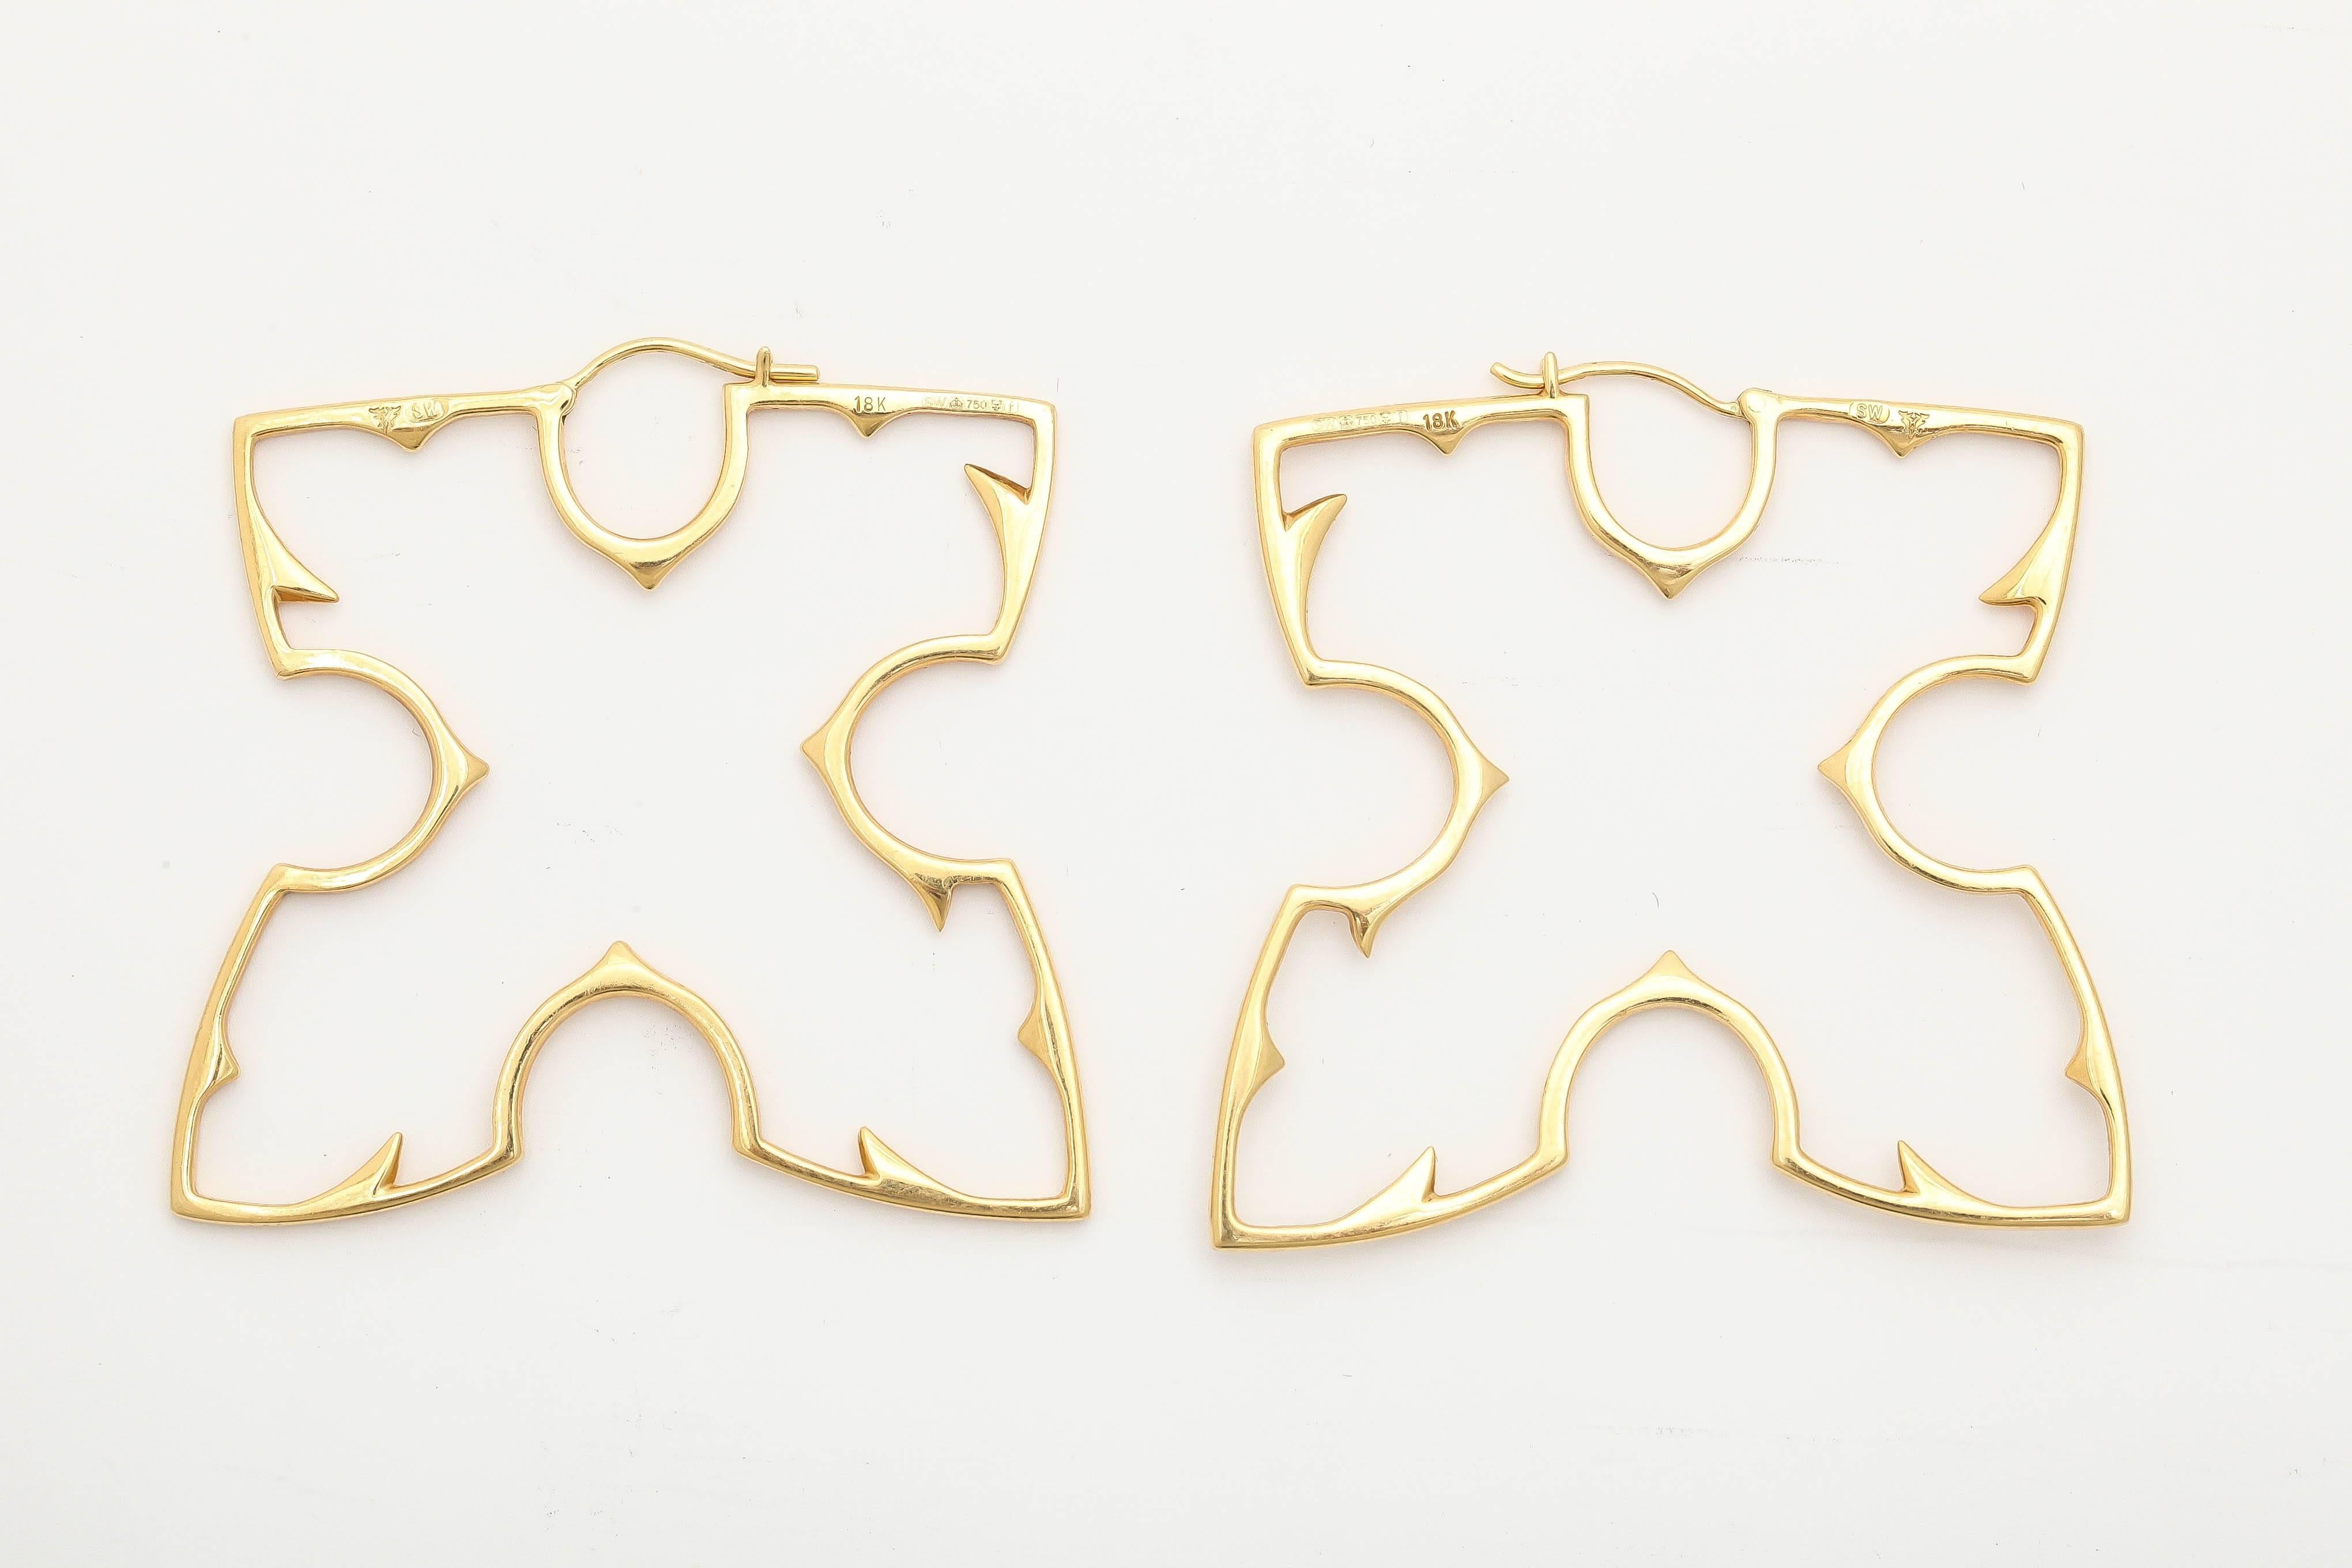 18kt yellow gold large hoop earrings in shape of a Jig Saw Puzzle Motif These Are Very High Fashion Earrings Great For Everyday Use. Made In America in the 1970,s.